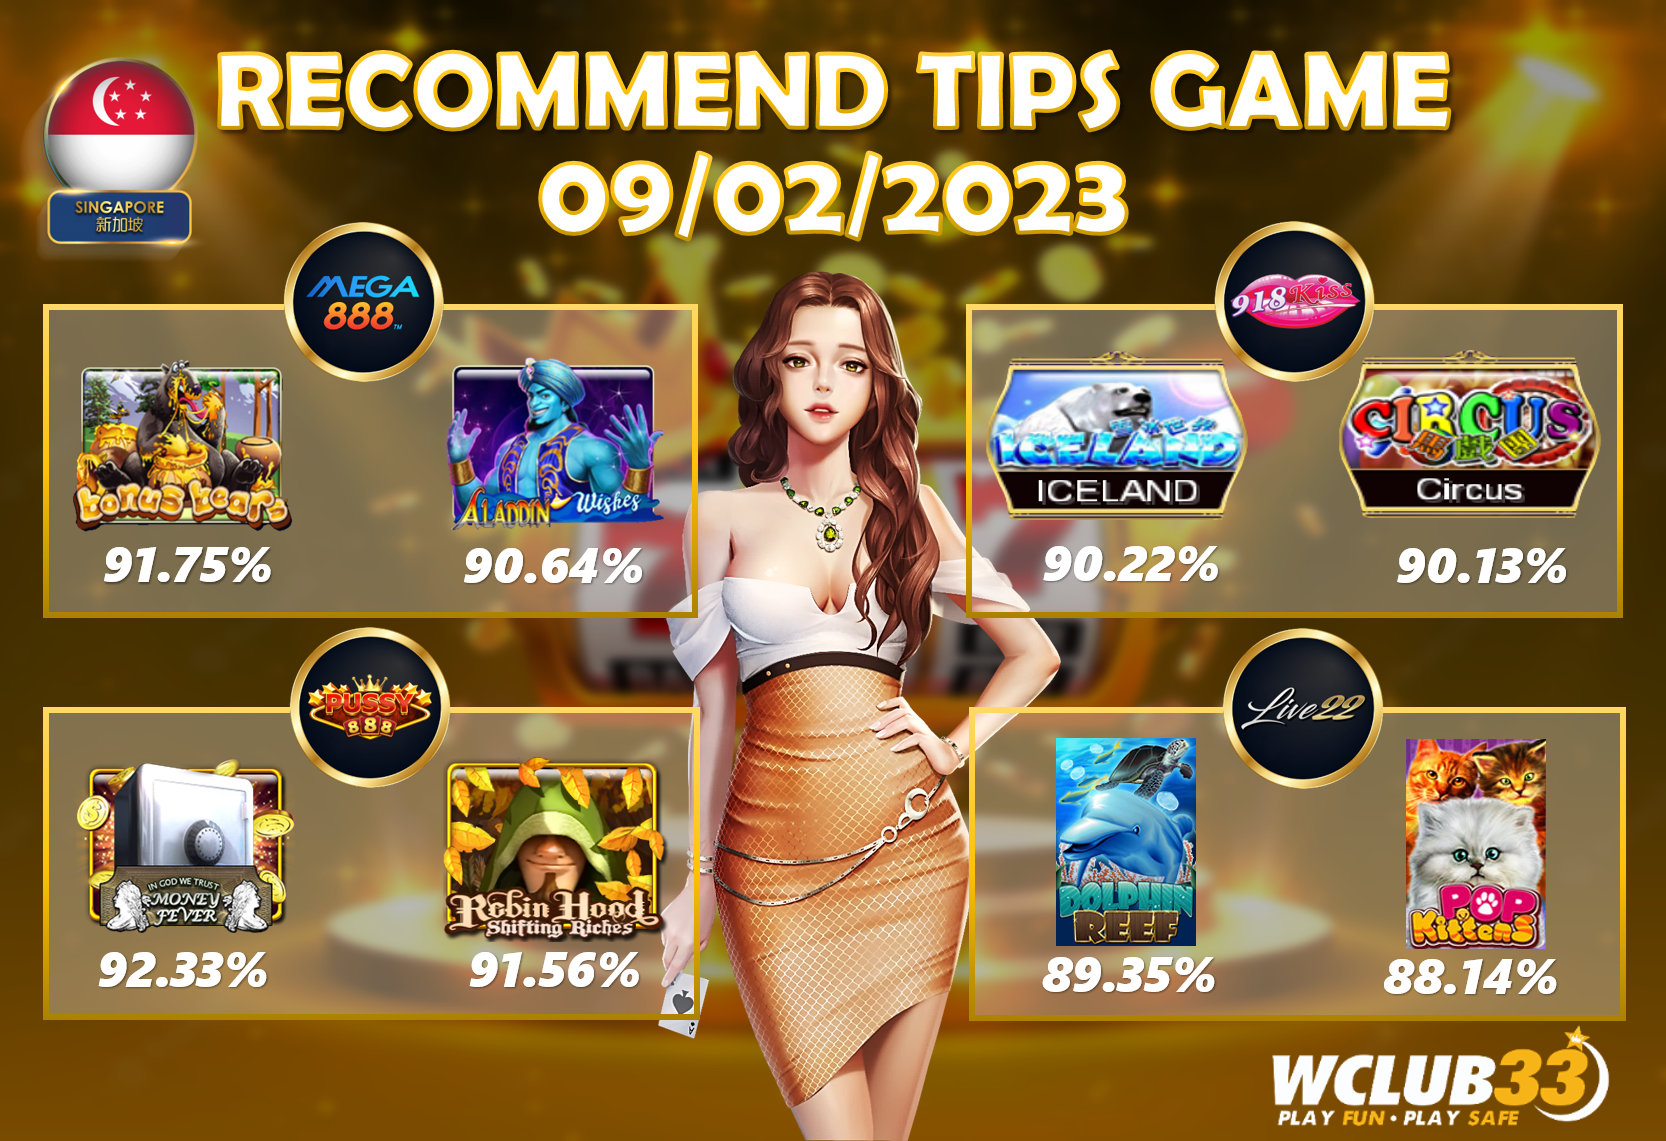 UPDATE TIPS GAME 09/02